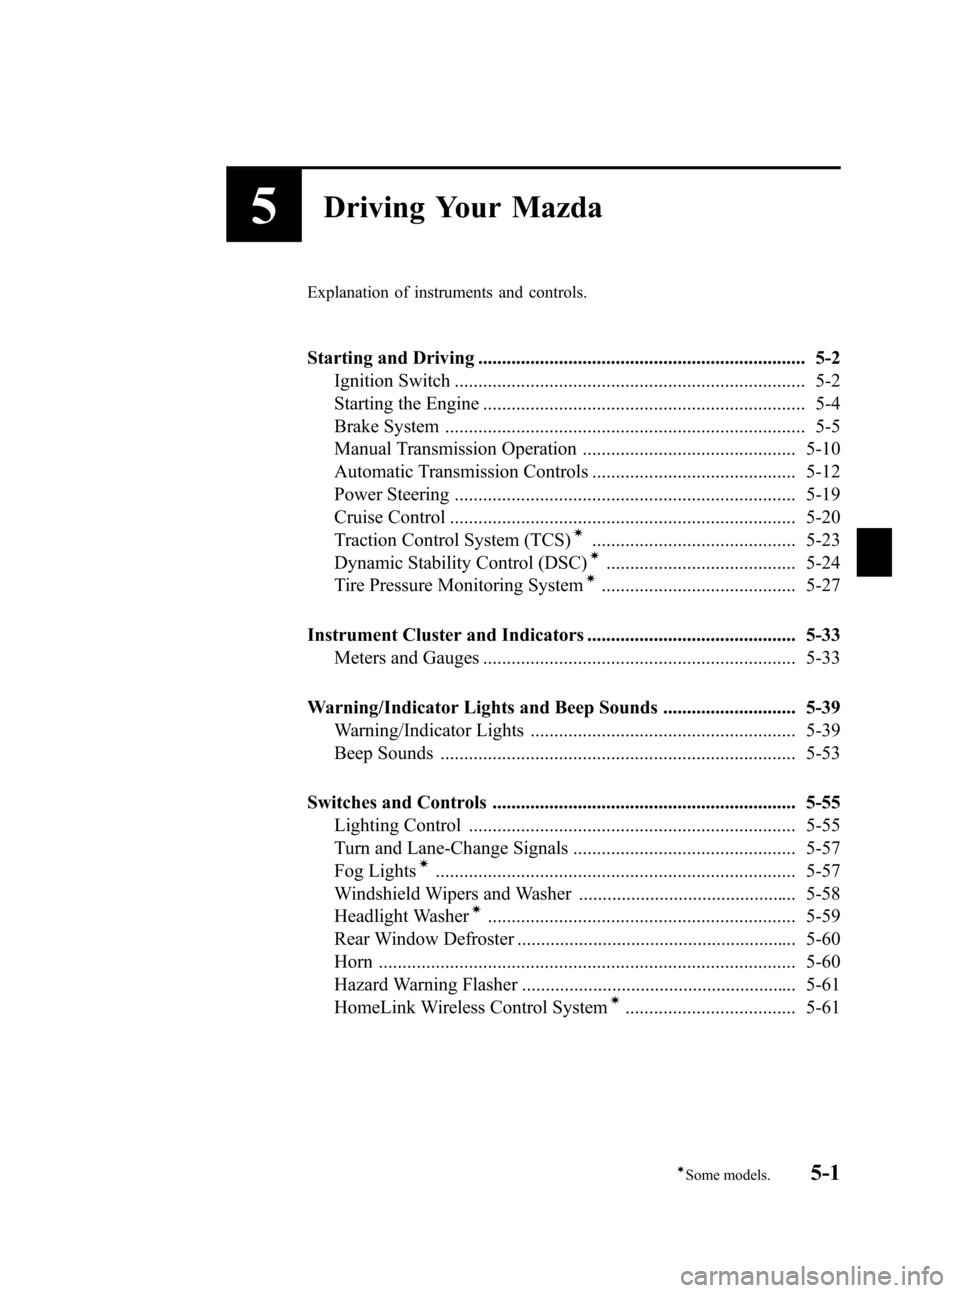 MAZDA MODEL RX 8 2008  Owners Manual (in English) Black plate (127,1)
5Driving Your Mazda
Explanation of instruments and controls.
Starting and Driving ..................................................................... 5-2Ignition Switch .........